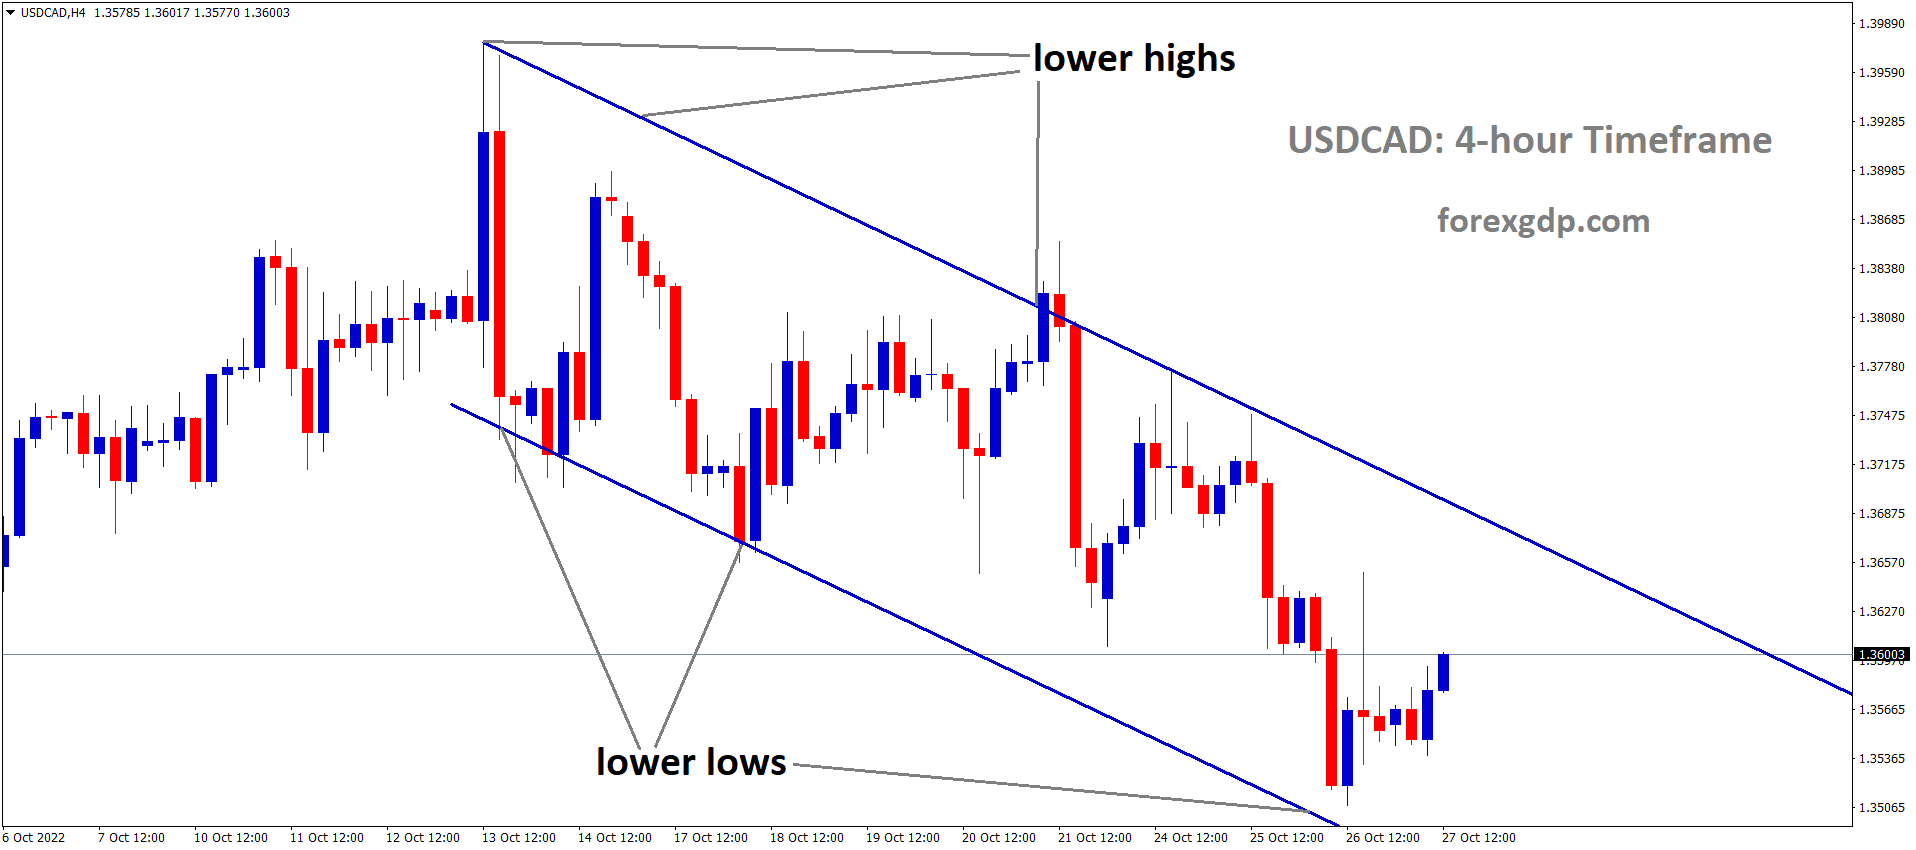 USDCAD is moving in the Descending channel and the market has rebounded from the lower low area of the channel